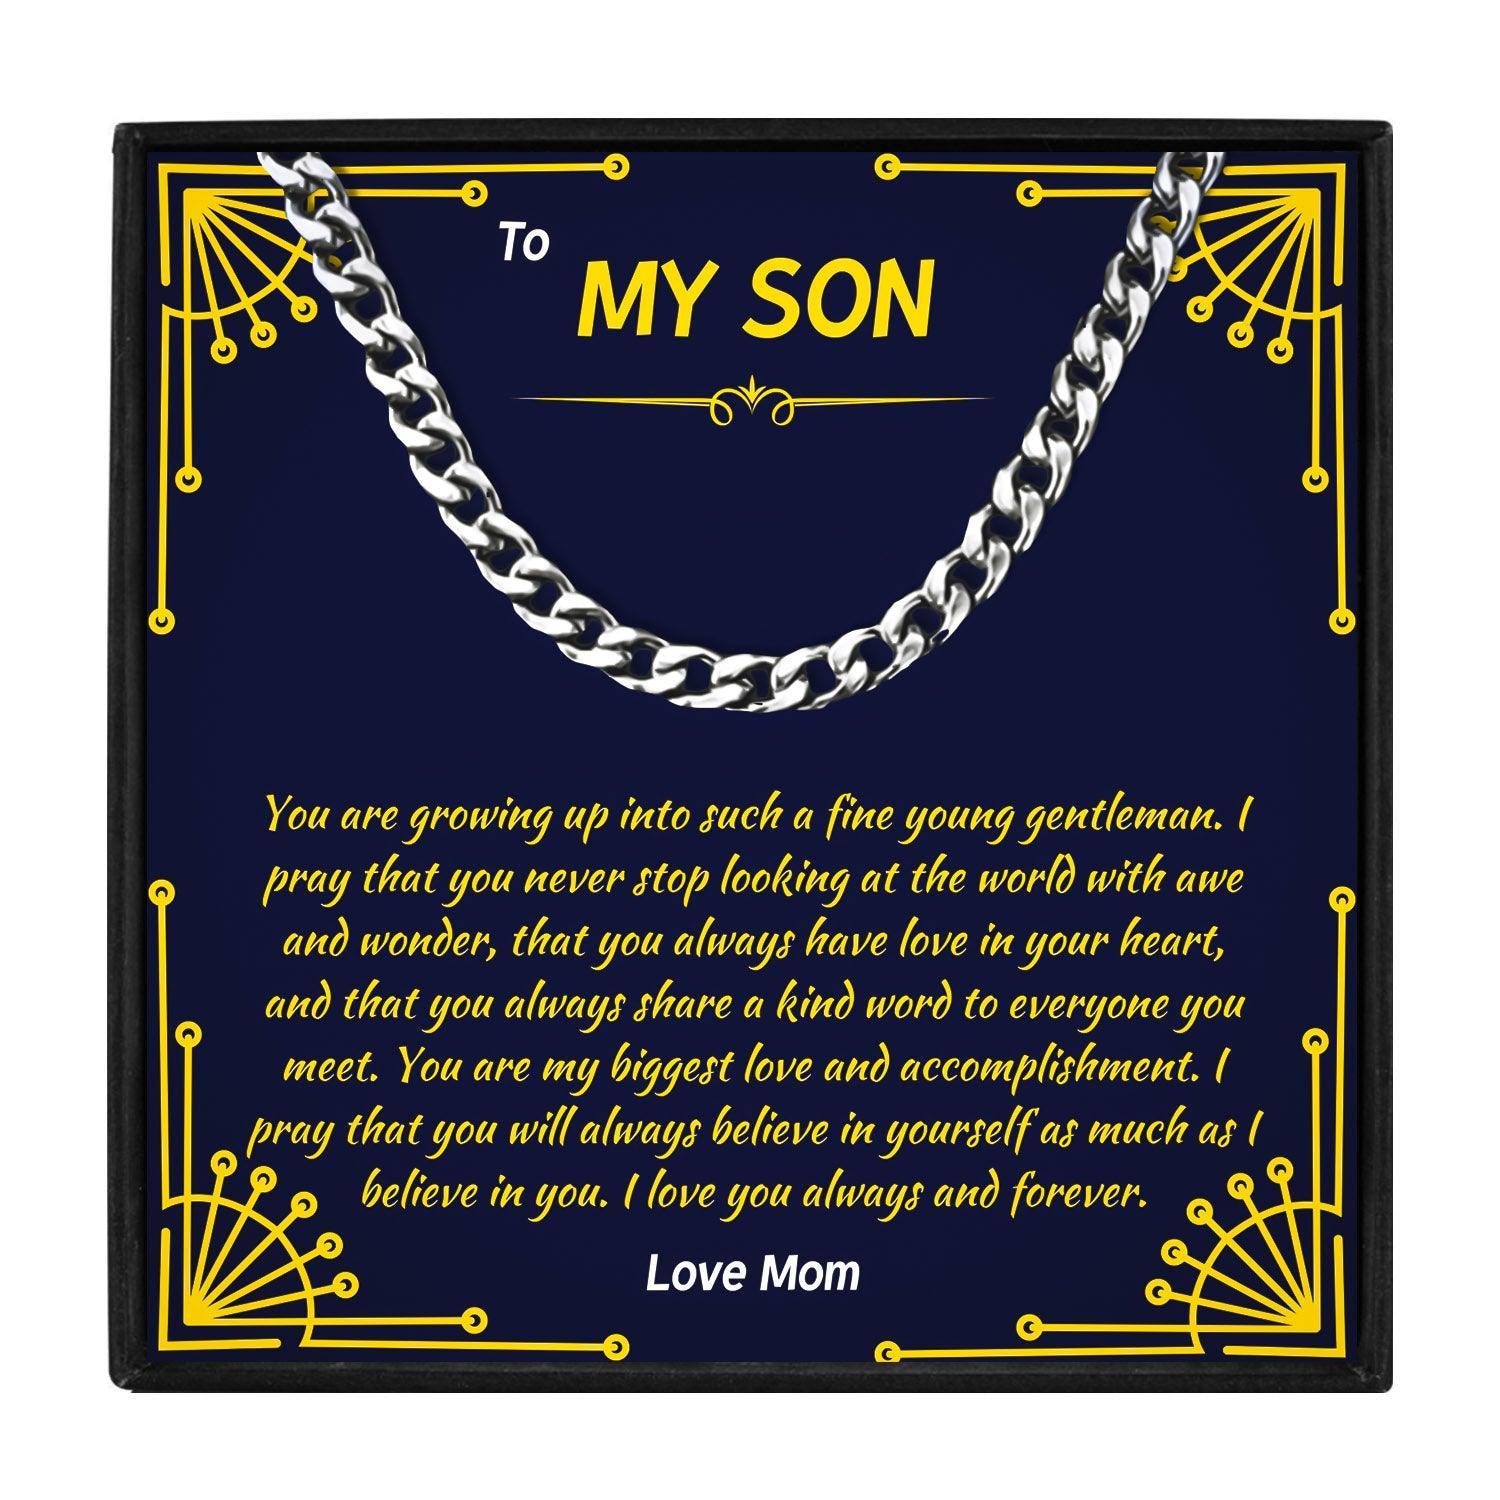 Mother And Son Necklace Gift Set From Mom for Christmas 2023 | Mother And Son Necklace Gift Set From Mom - undefined | mother and son necklace, mother son necklaces, son necklace from mom, to my son necklace | From Hunny Life | hunnylife.com